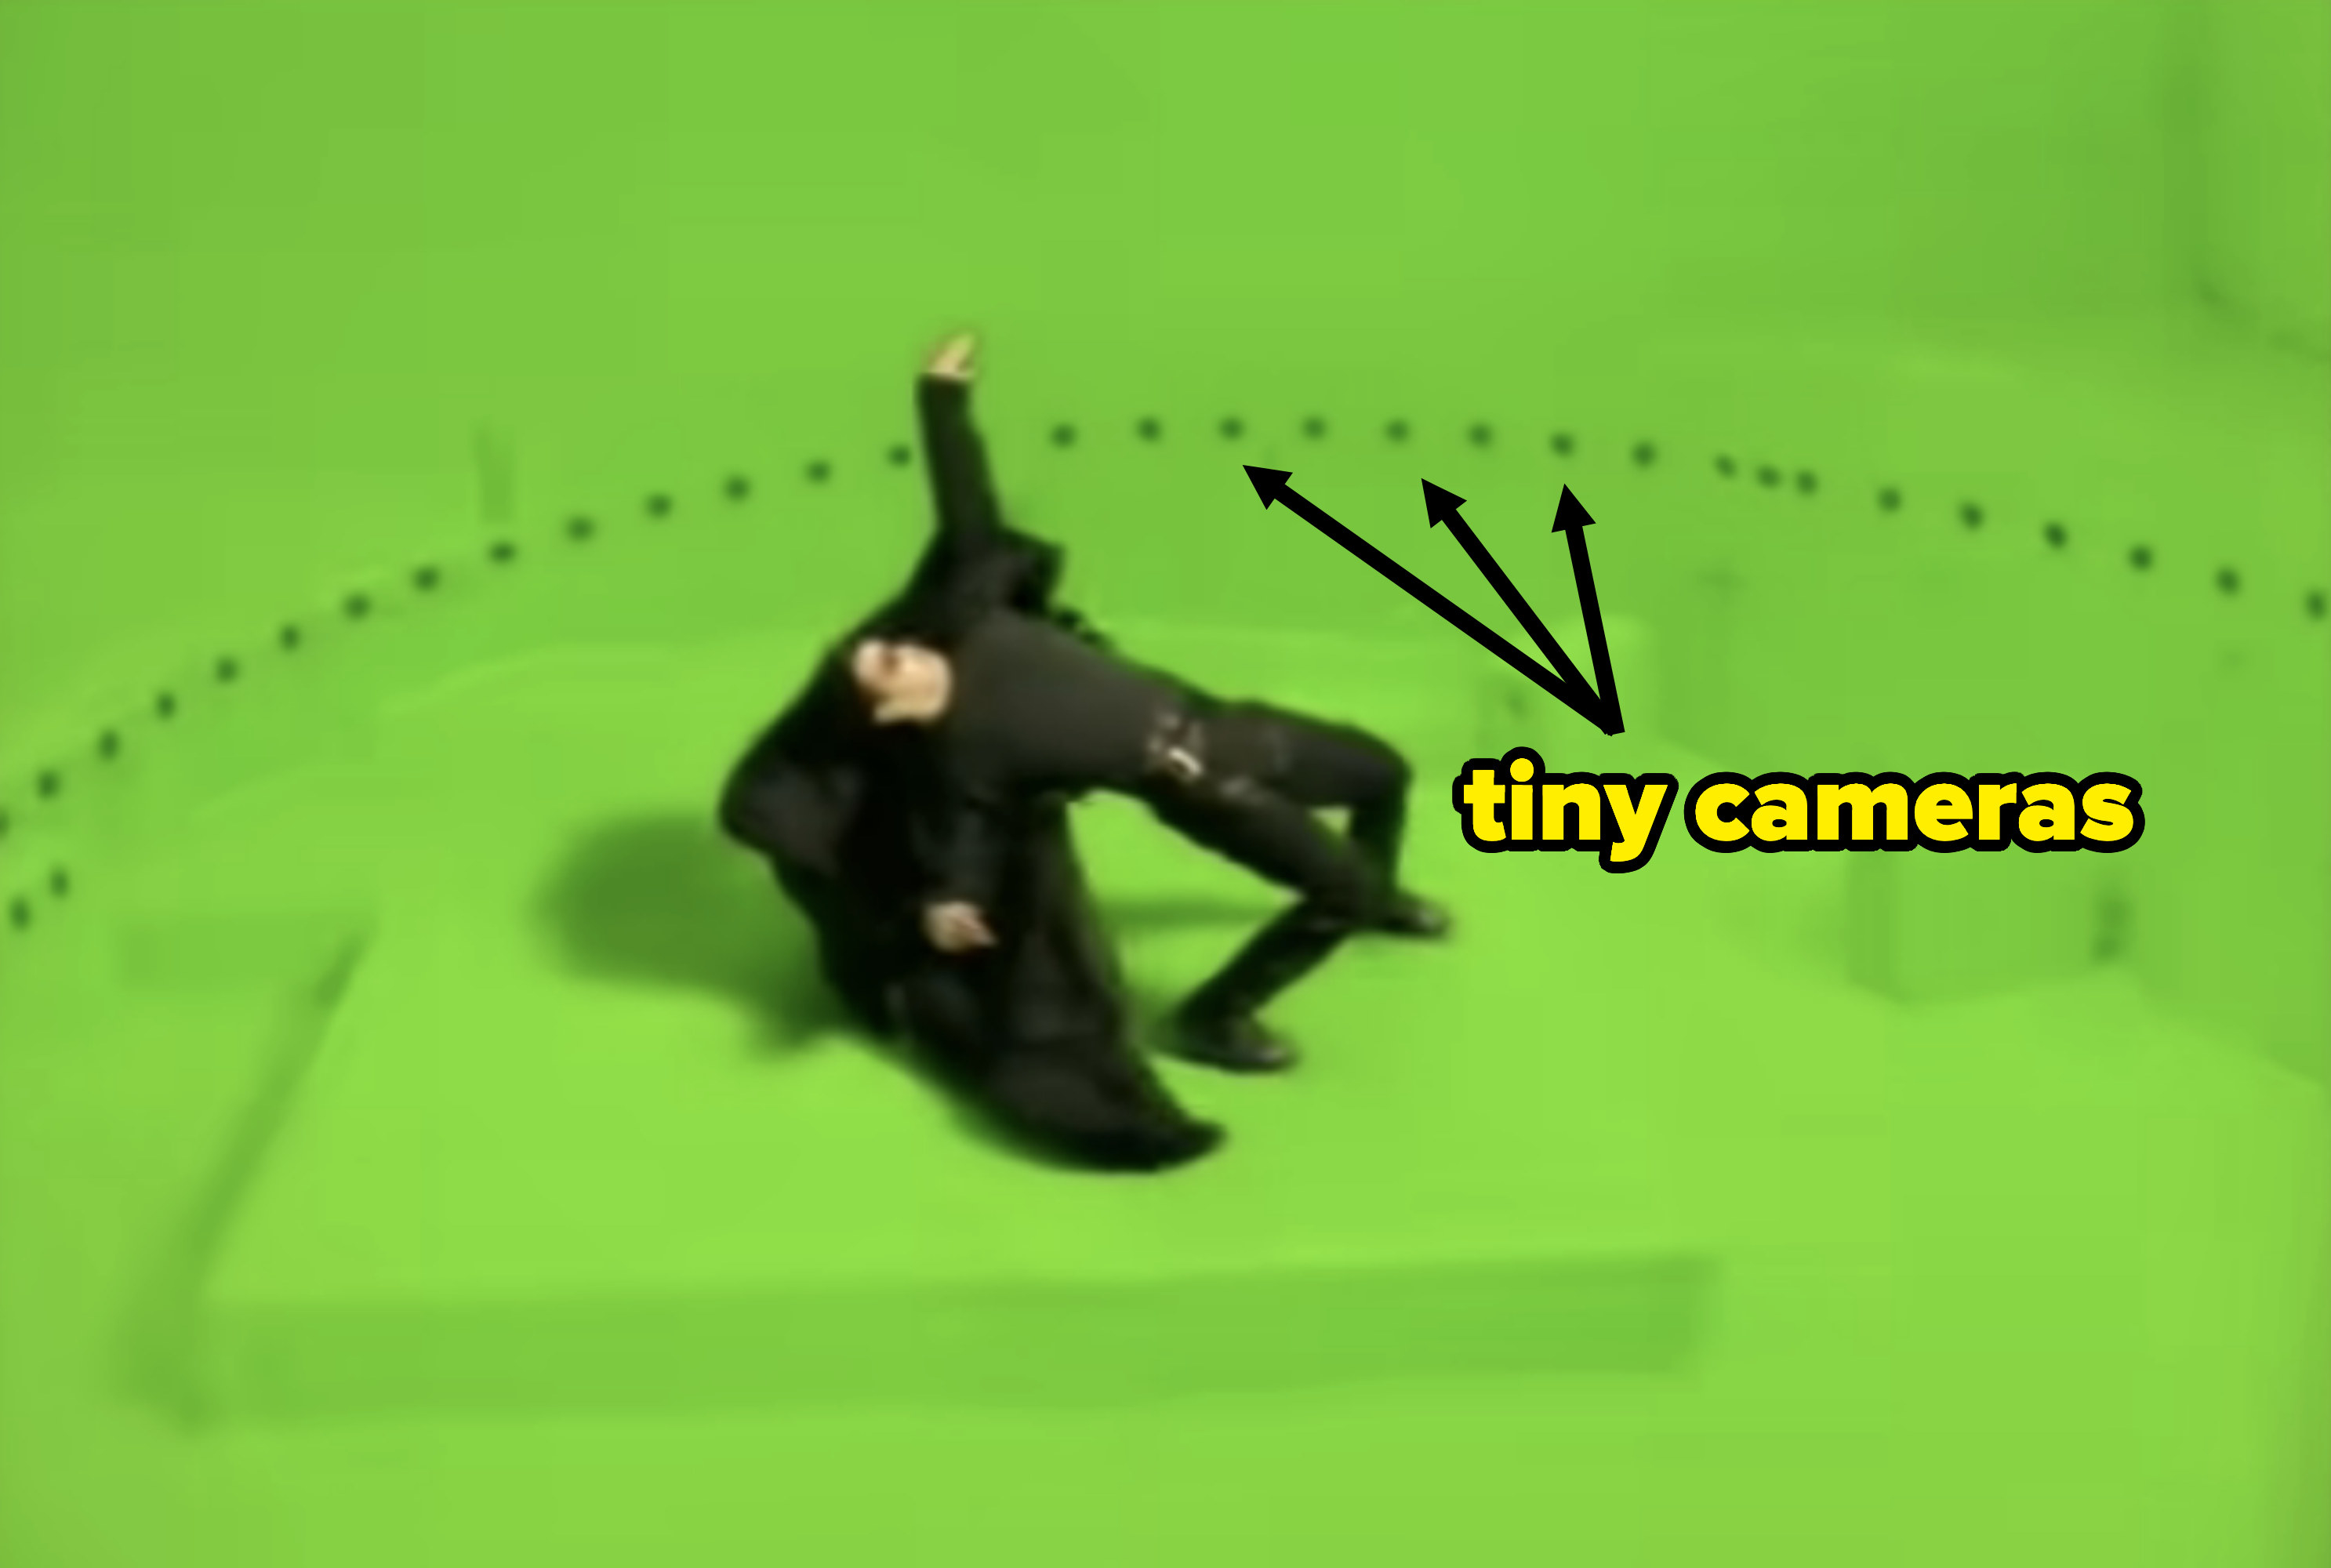 keanu leaning back with arrows pointing to the tiny cameras surrounding him